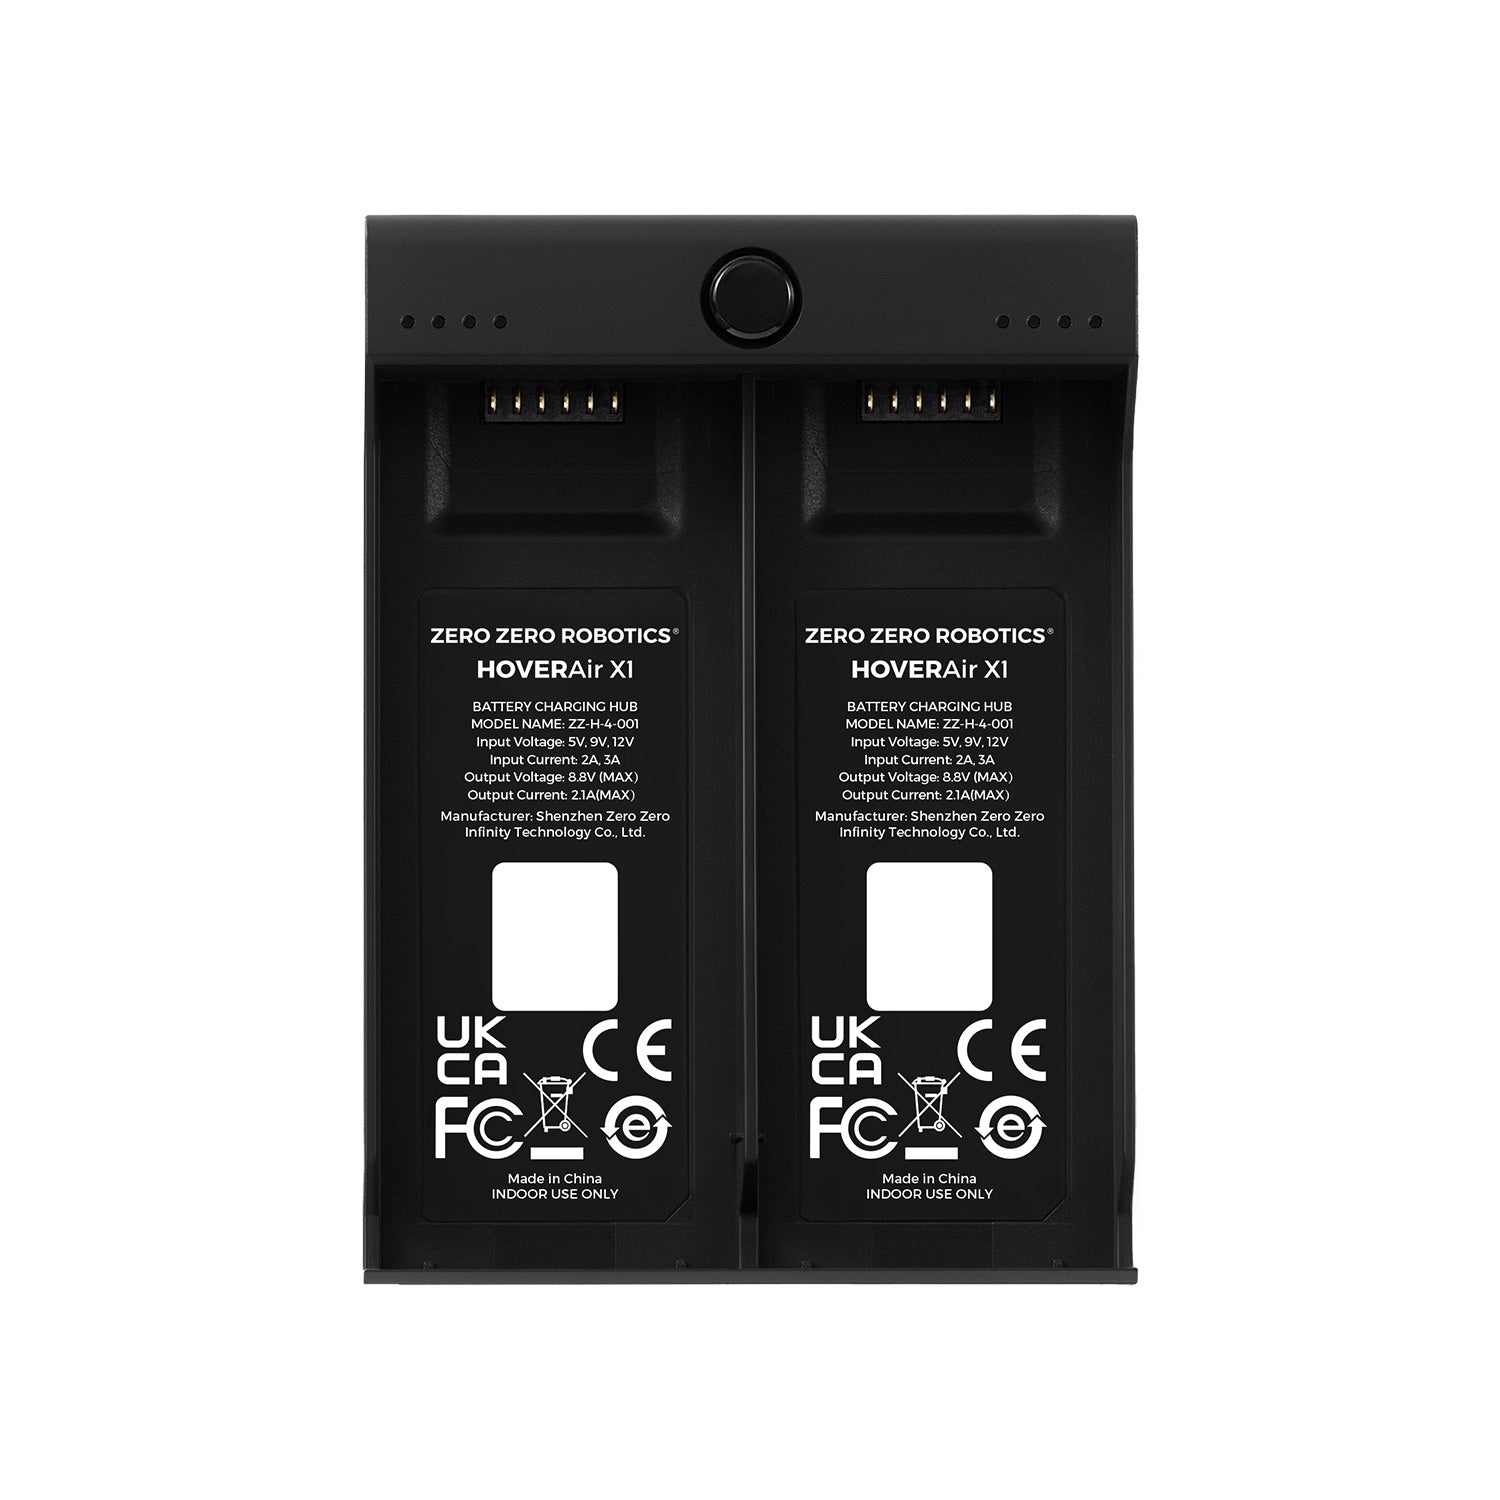 HOVERAir x1 battery charger